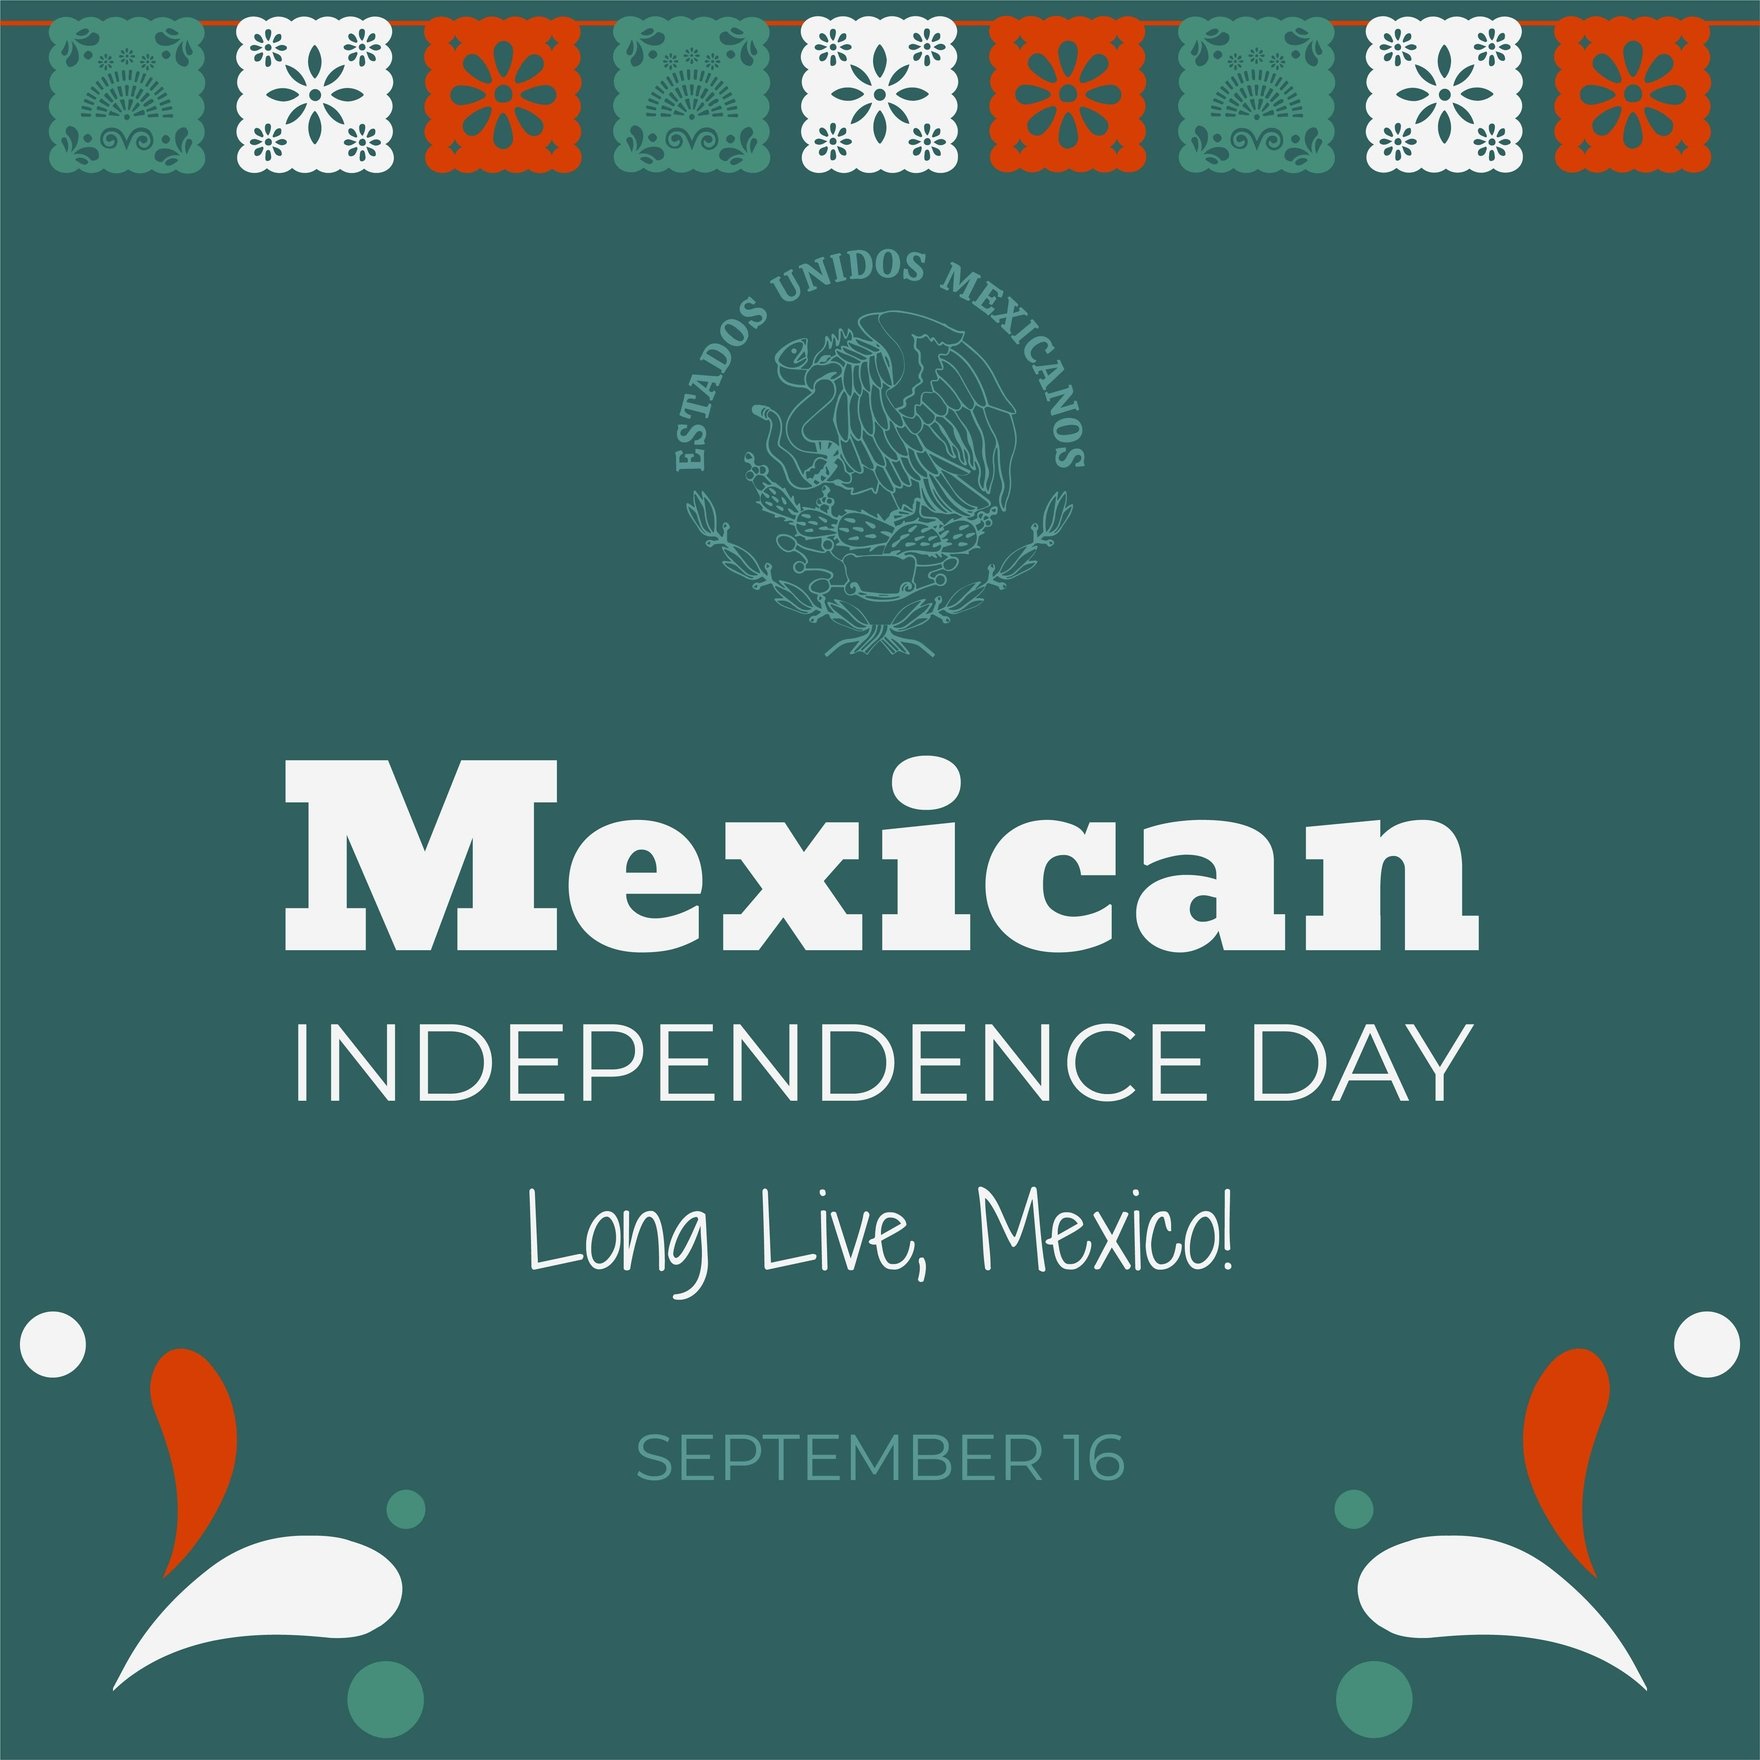 Mexican Independence Day Instagram Post